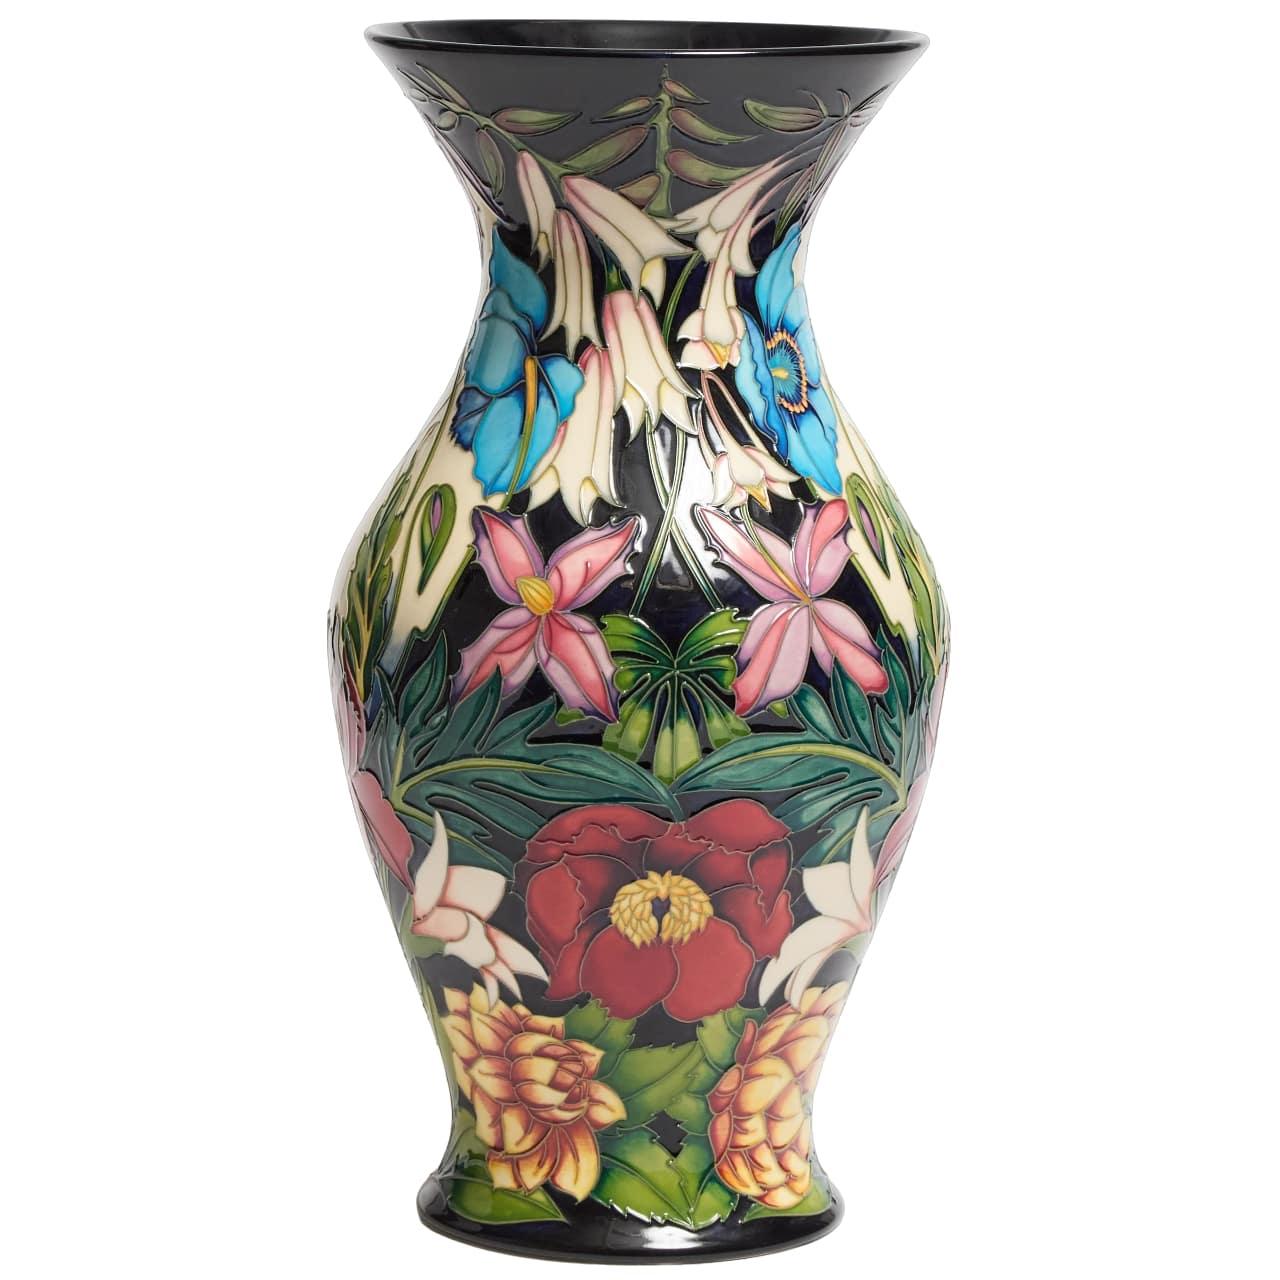 A large and impressive Moorcroft vase in the 'Hidcote Manor' pattern designed by Philip Gibson in 2004, a limited edition numbered 15/75.
Signed to the base, with impressed and painted factory marks
46cm high
Good condition